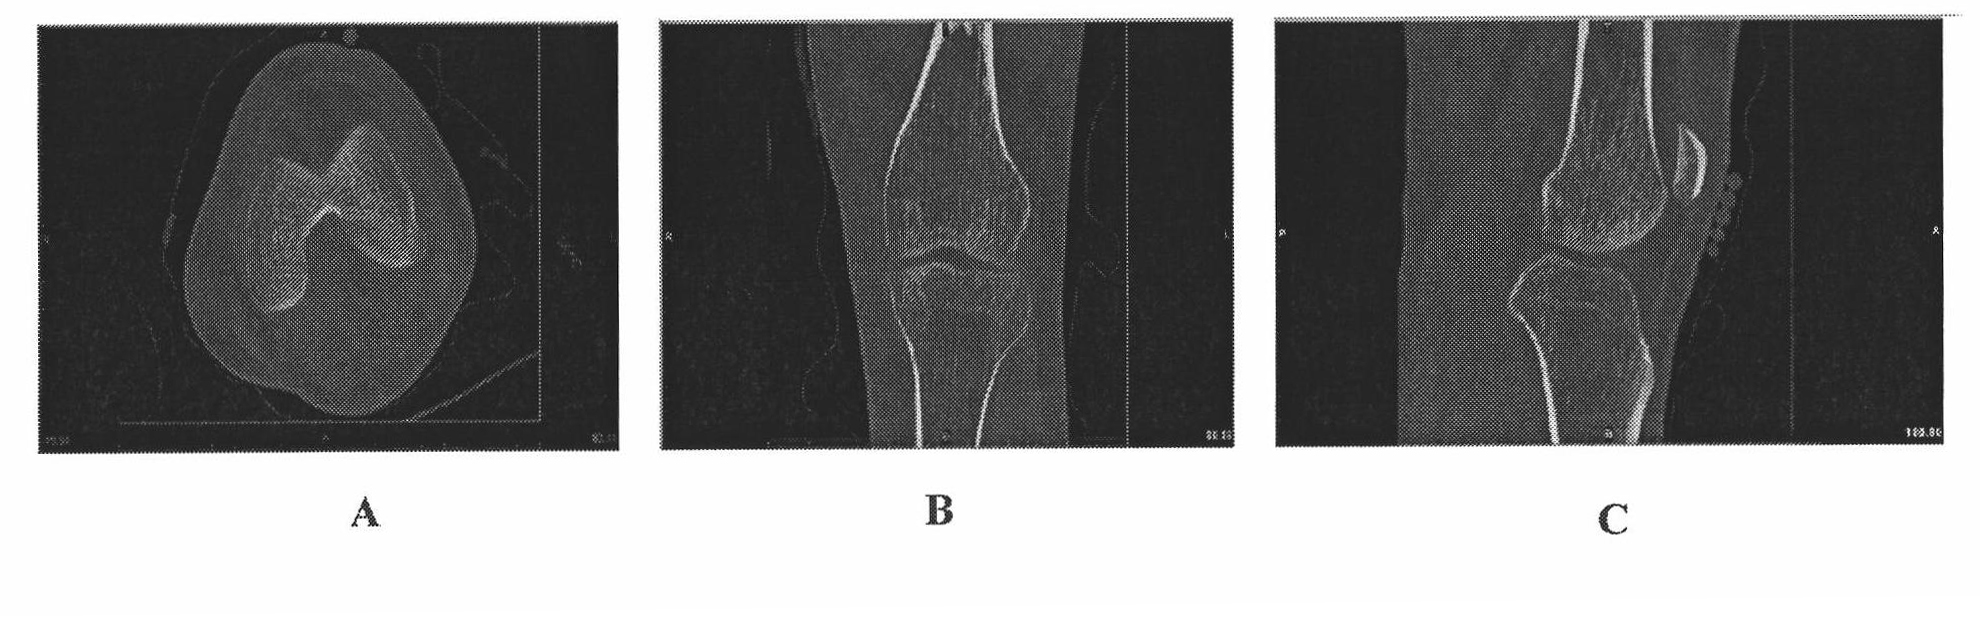 Method for positioning human body knee joint flexible motion axis in lateral femoral condyle long-axis section